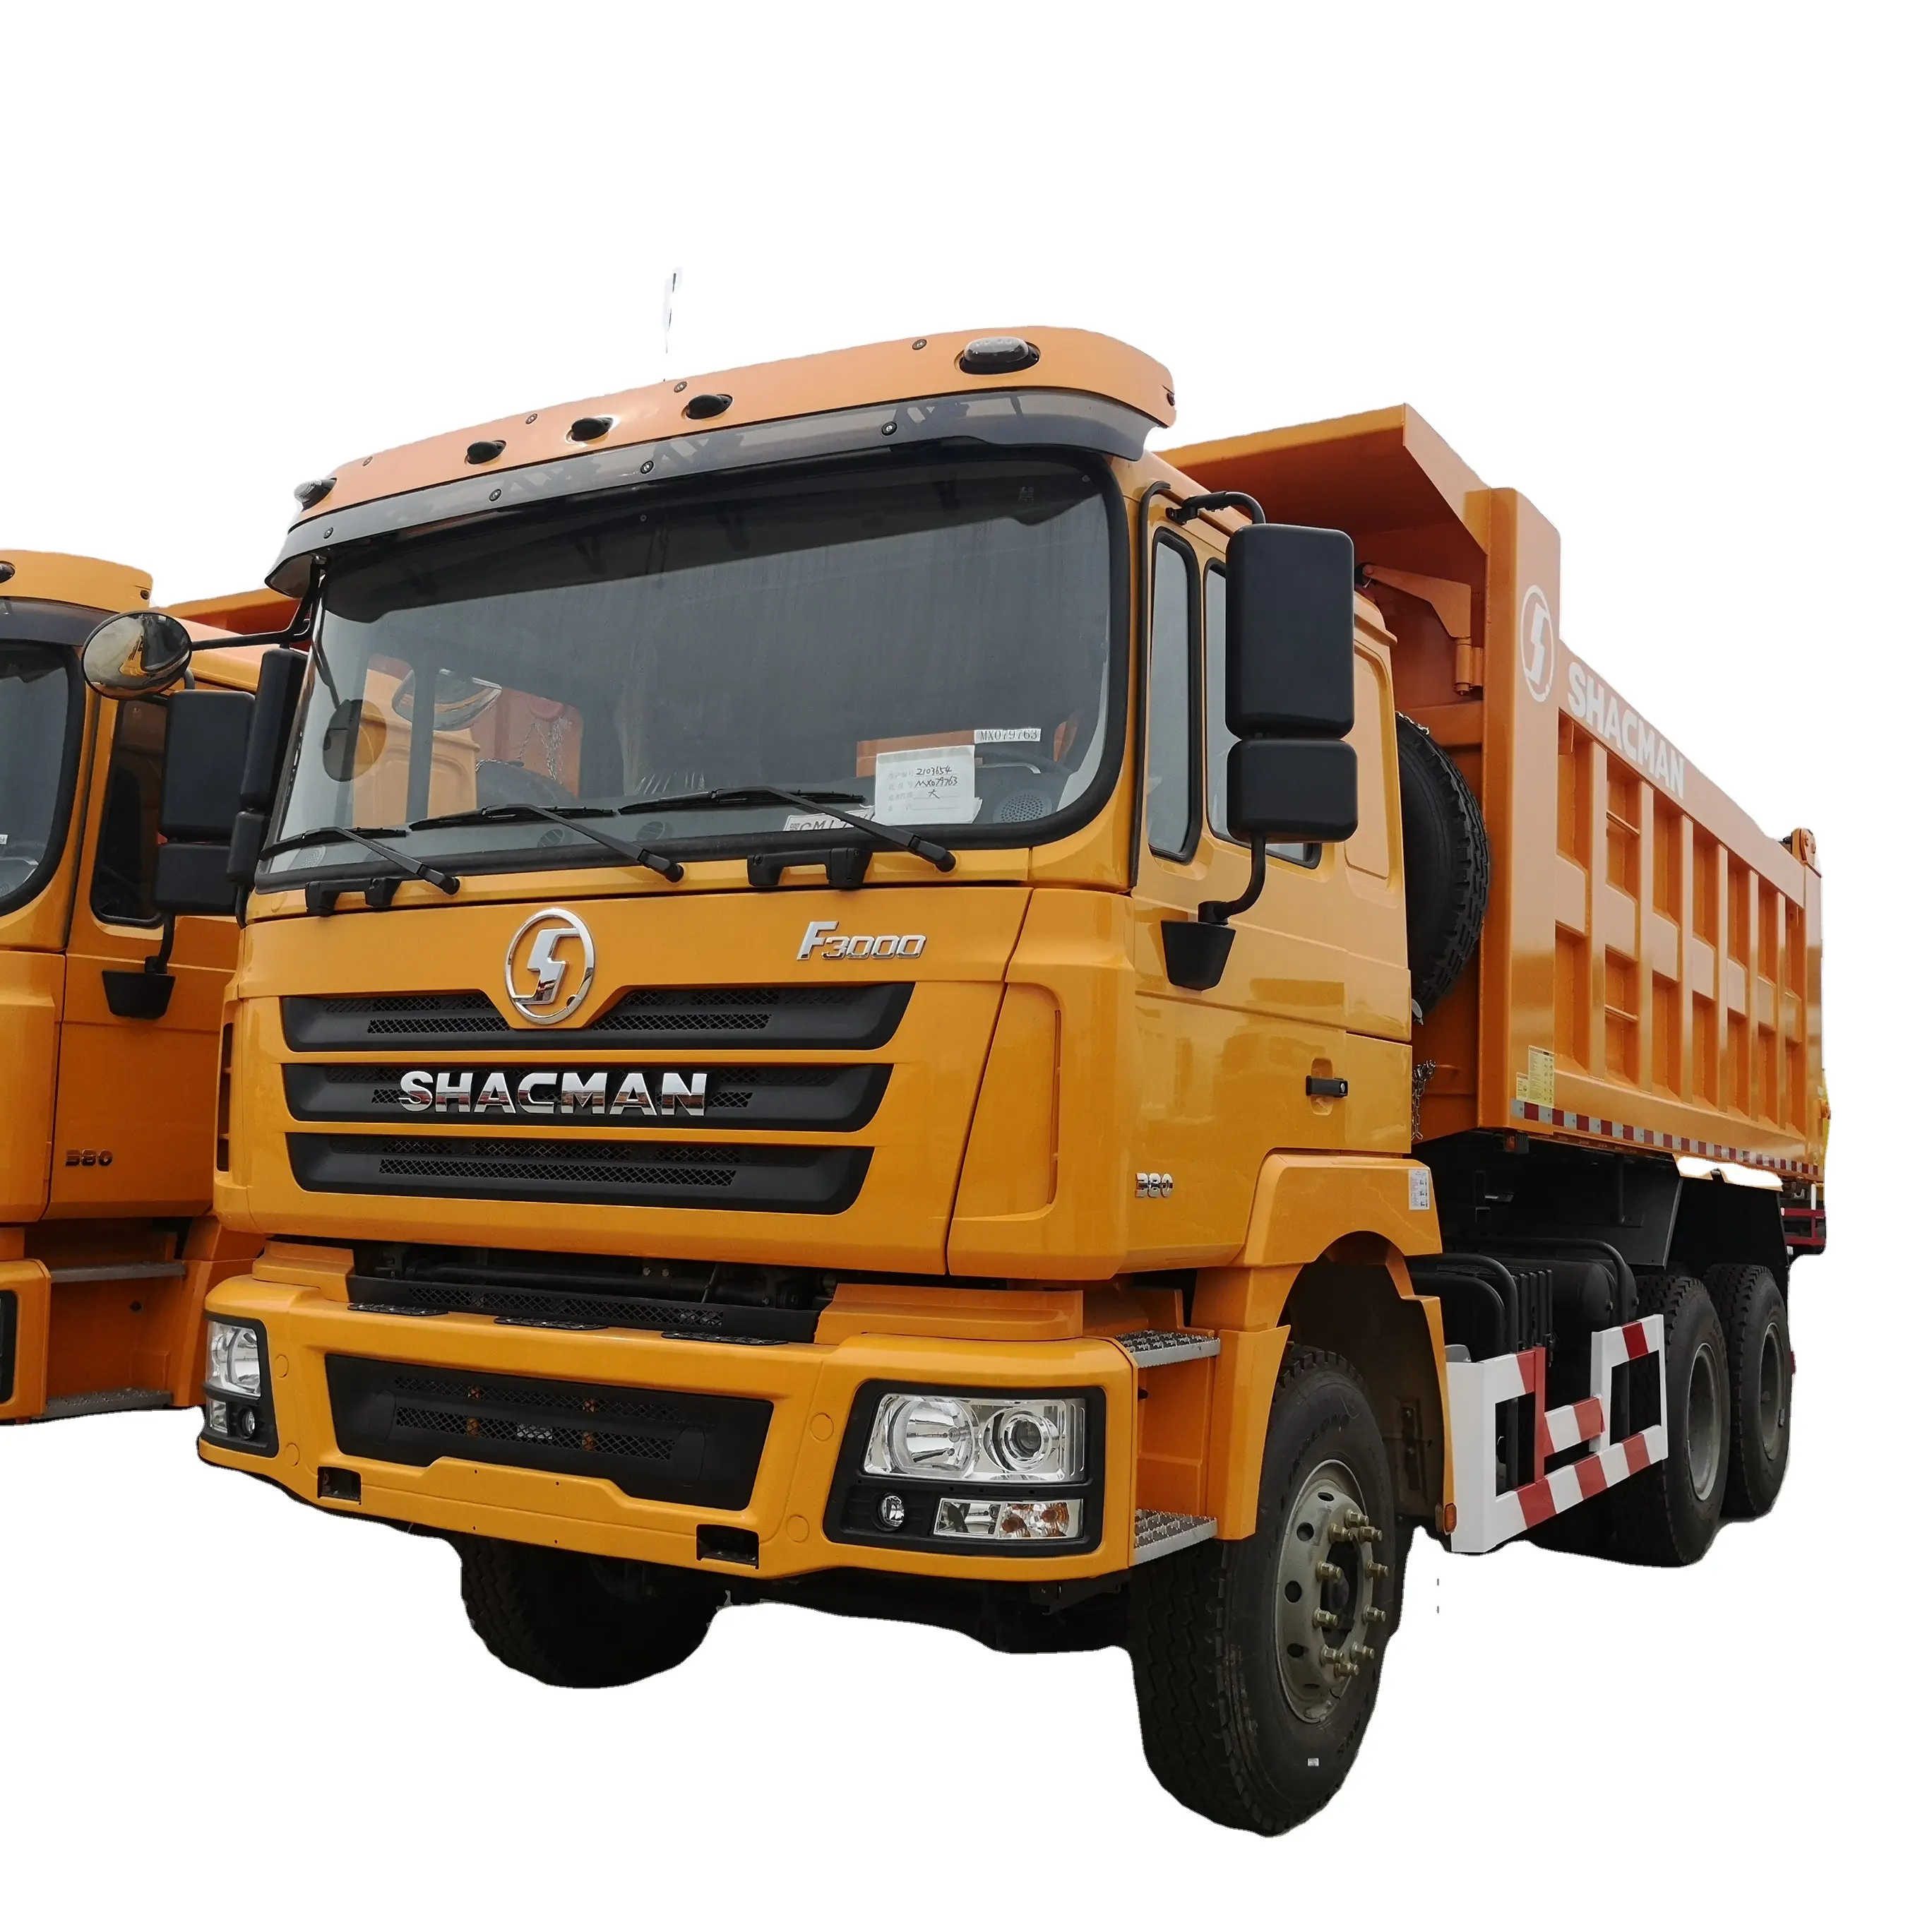 Used and New Shacman 6*4 Tipper Dumper Truck F3000 H3000 X3000 Chacman 6X4 Mining 50tons Tipper Truck Dump Truck